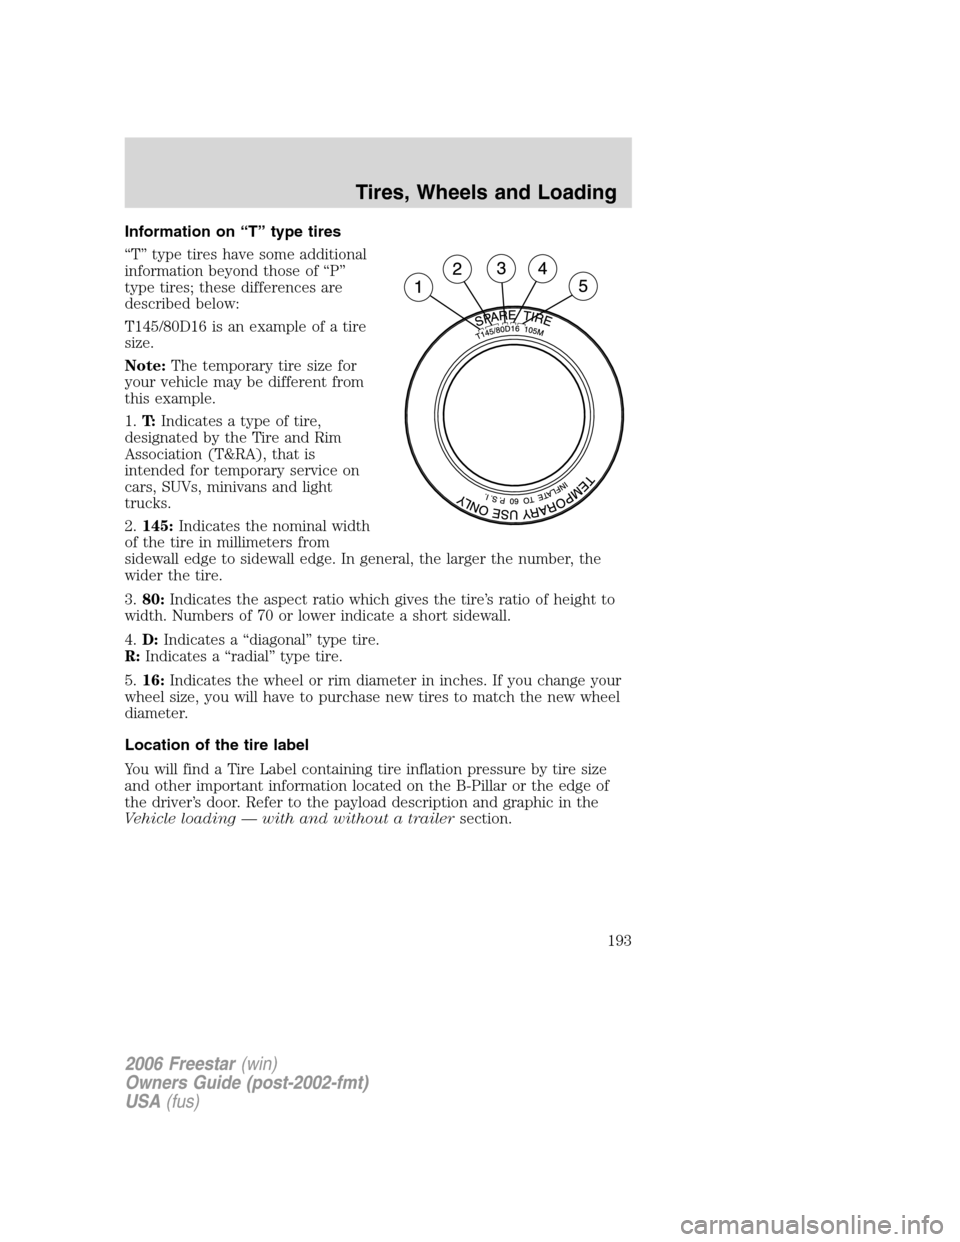 FORD FREESTAR 2006 1.G Owners Manual Information on “T” type tires
“T” type tires have some additional
information beyond those of “P”
type tires; these differences are
described below:
T145/80D16 is an example of a tire
size